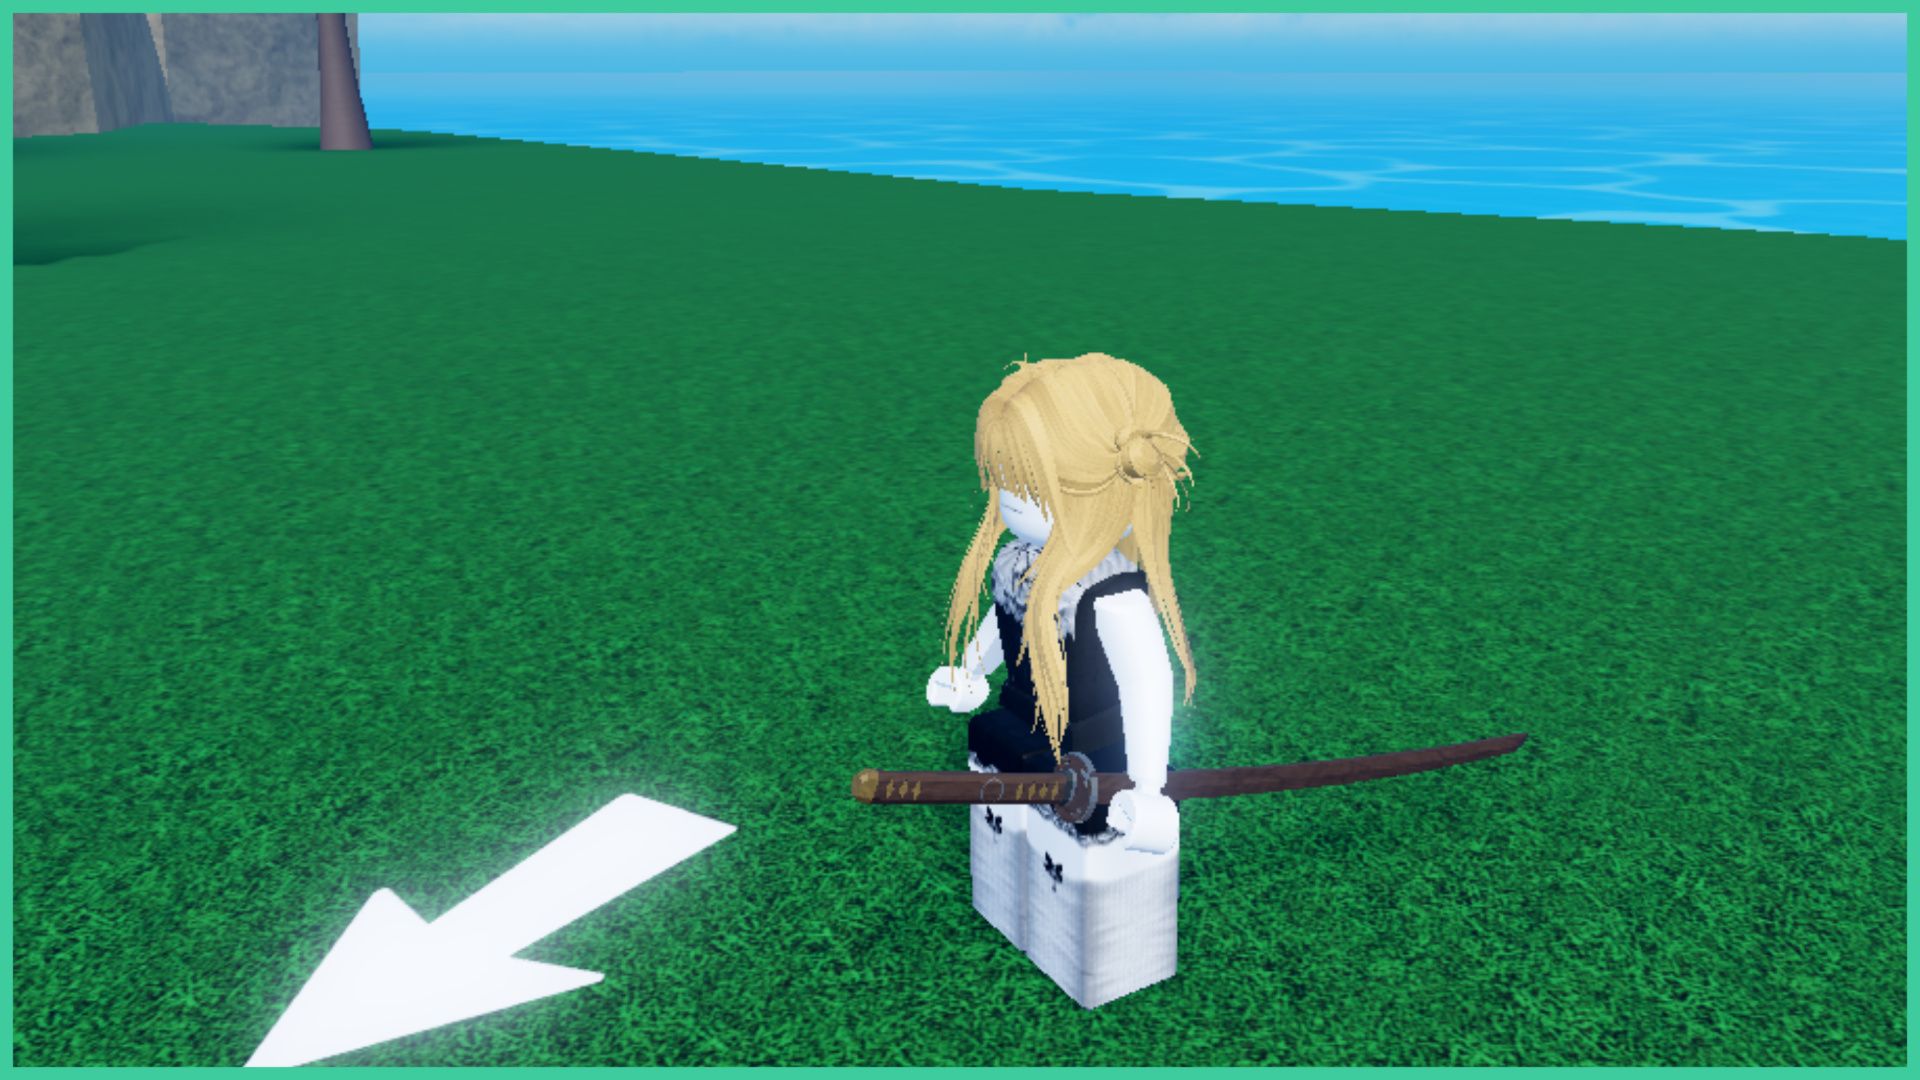 feature image for our cursed sea weapon tier list, the image is a screenshot from the game of a roblox character having a katana sword attached to their hip as they stand on a patch of grass close by to the ocean, there is a white arrow on the ground pointing downward to the left